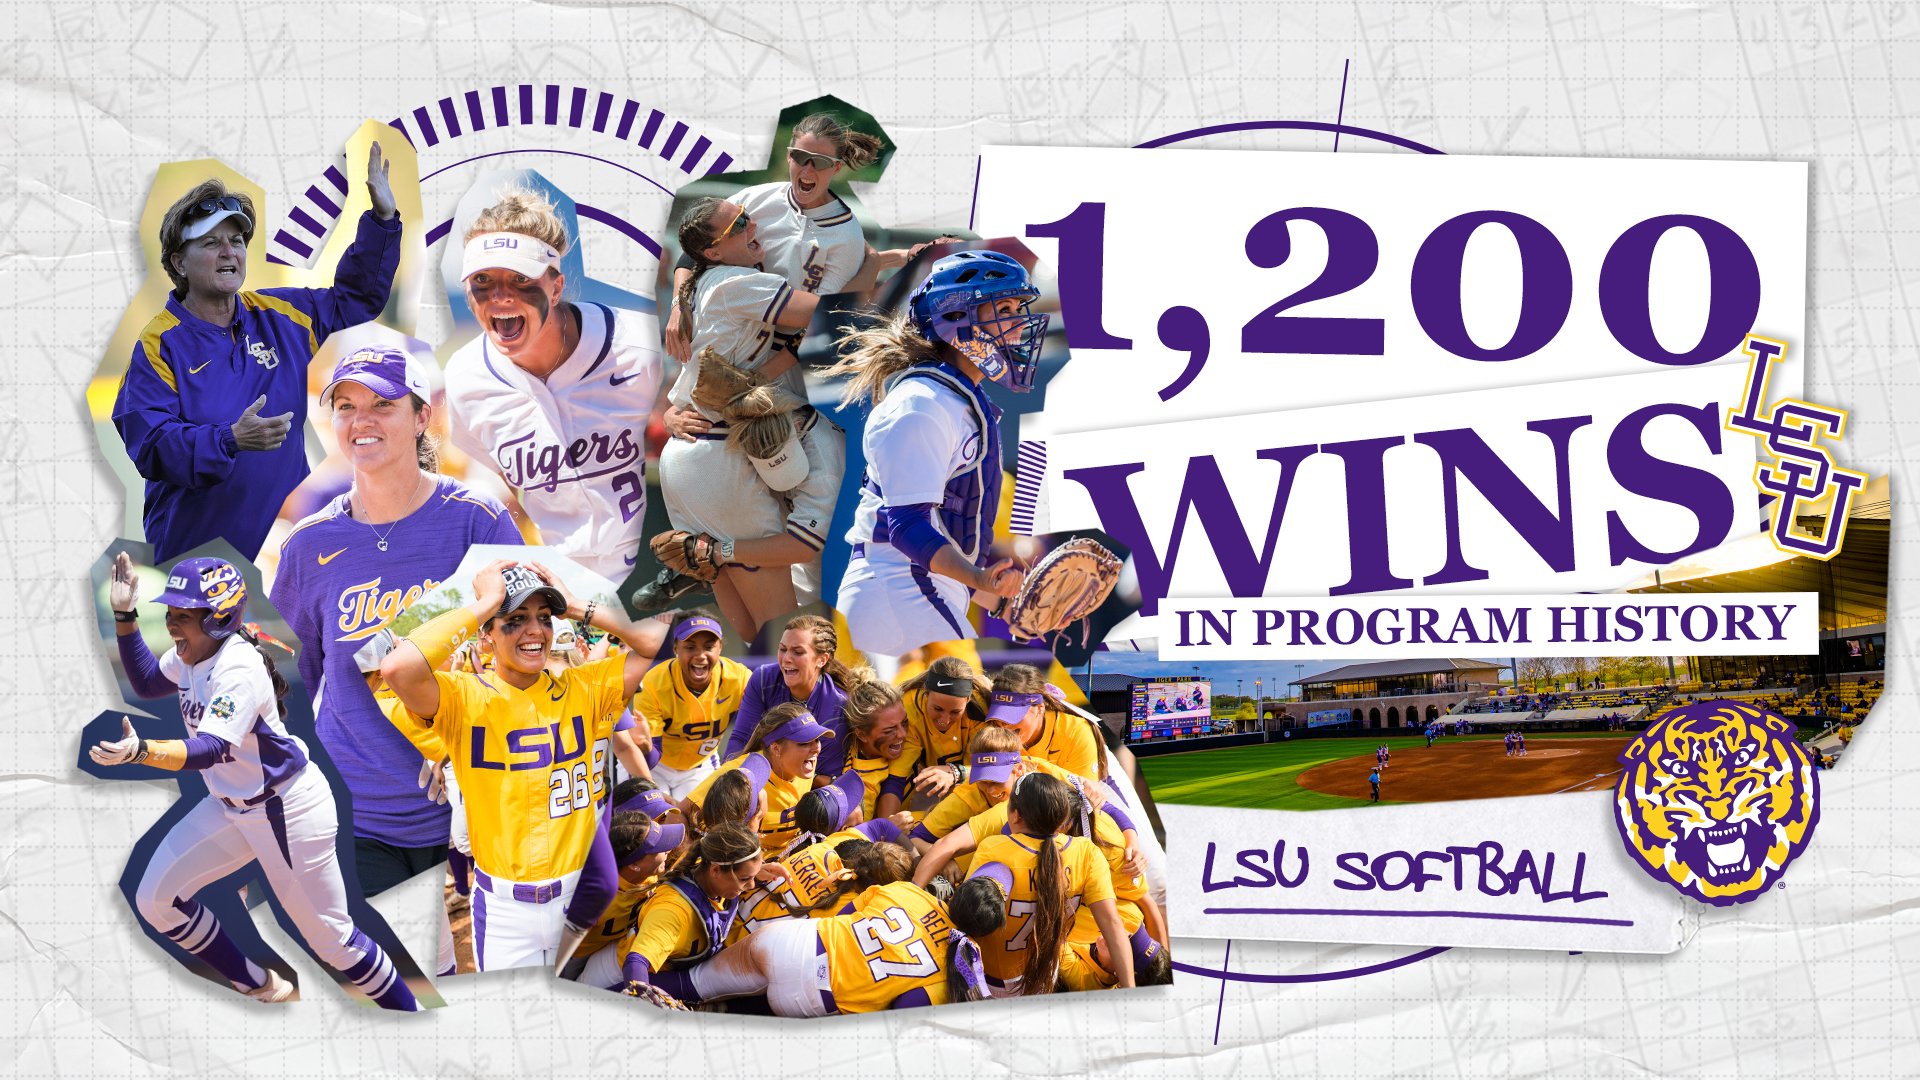 LSU Softball FOR LSU!!! The Fighting Tigers defeat Auburn, 4- for the 200th win in program history